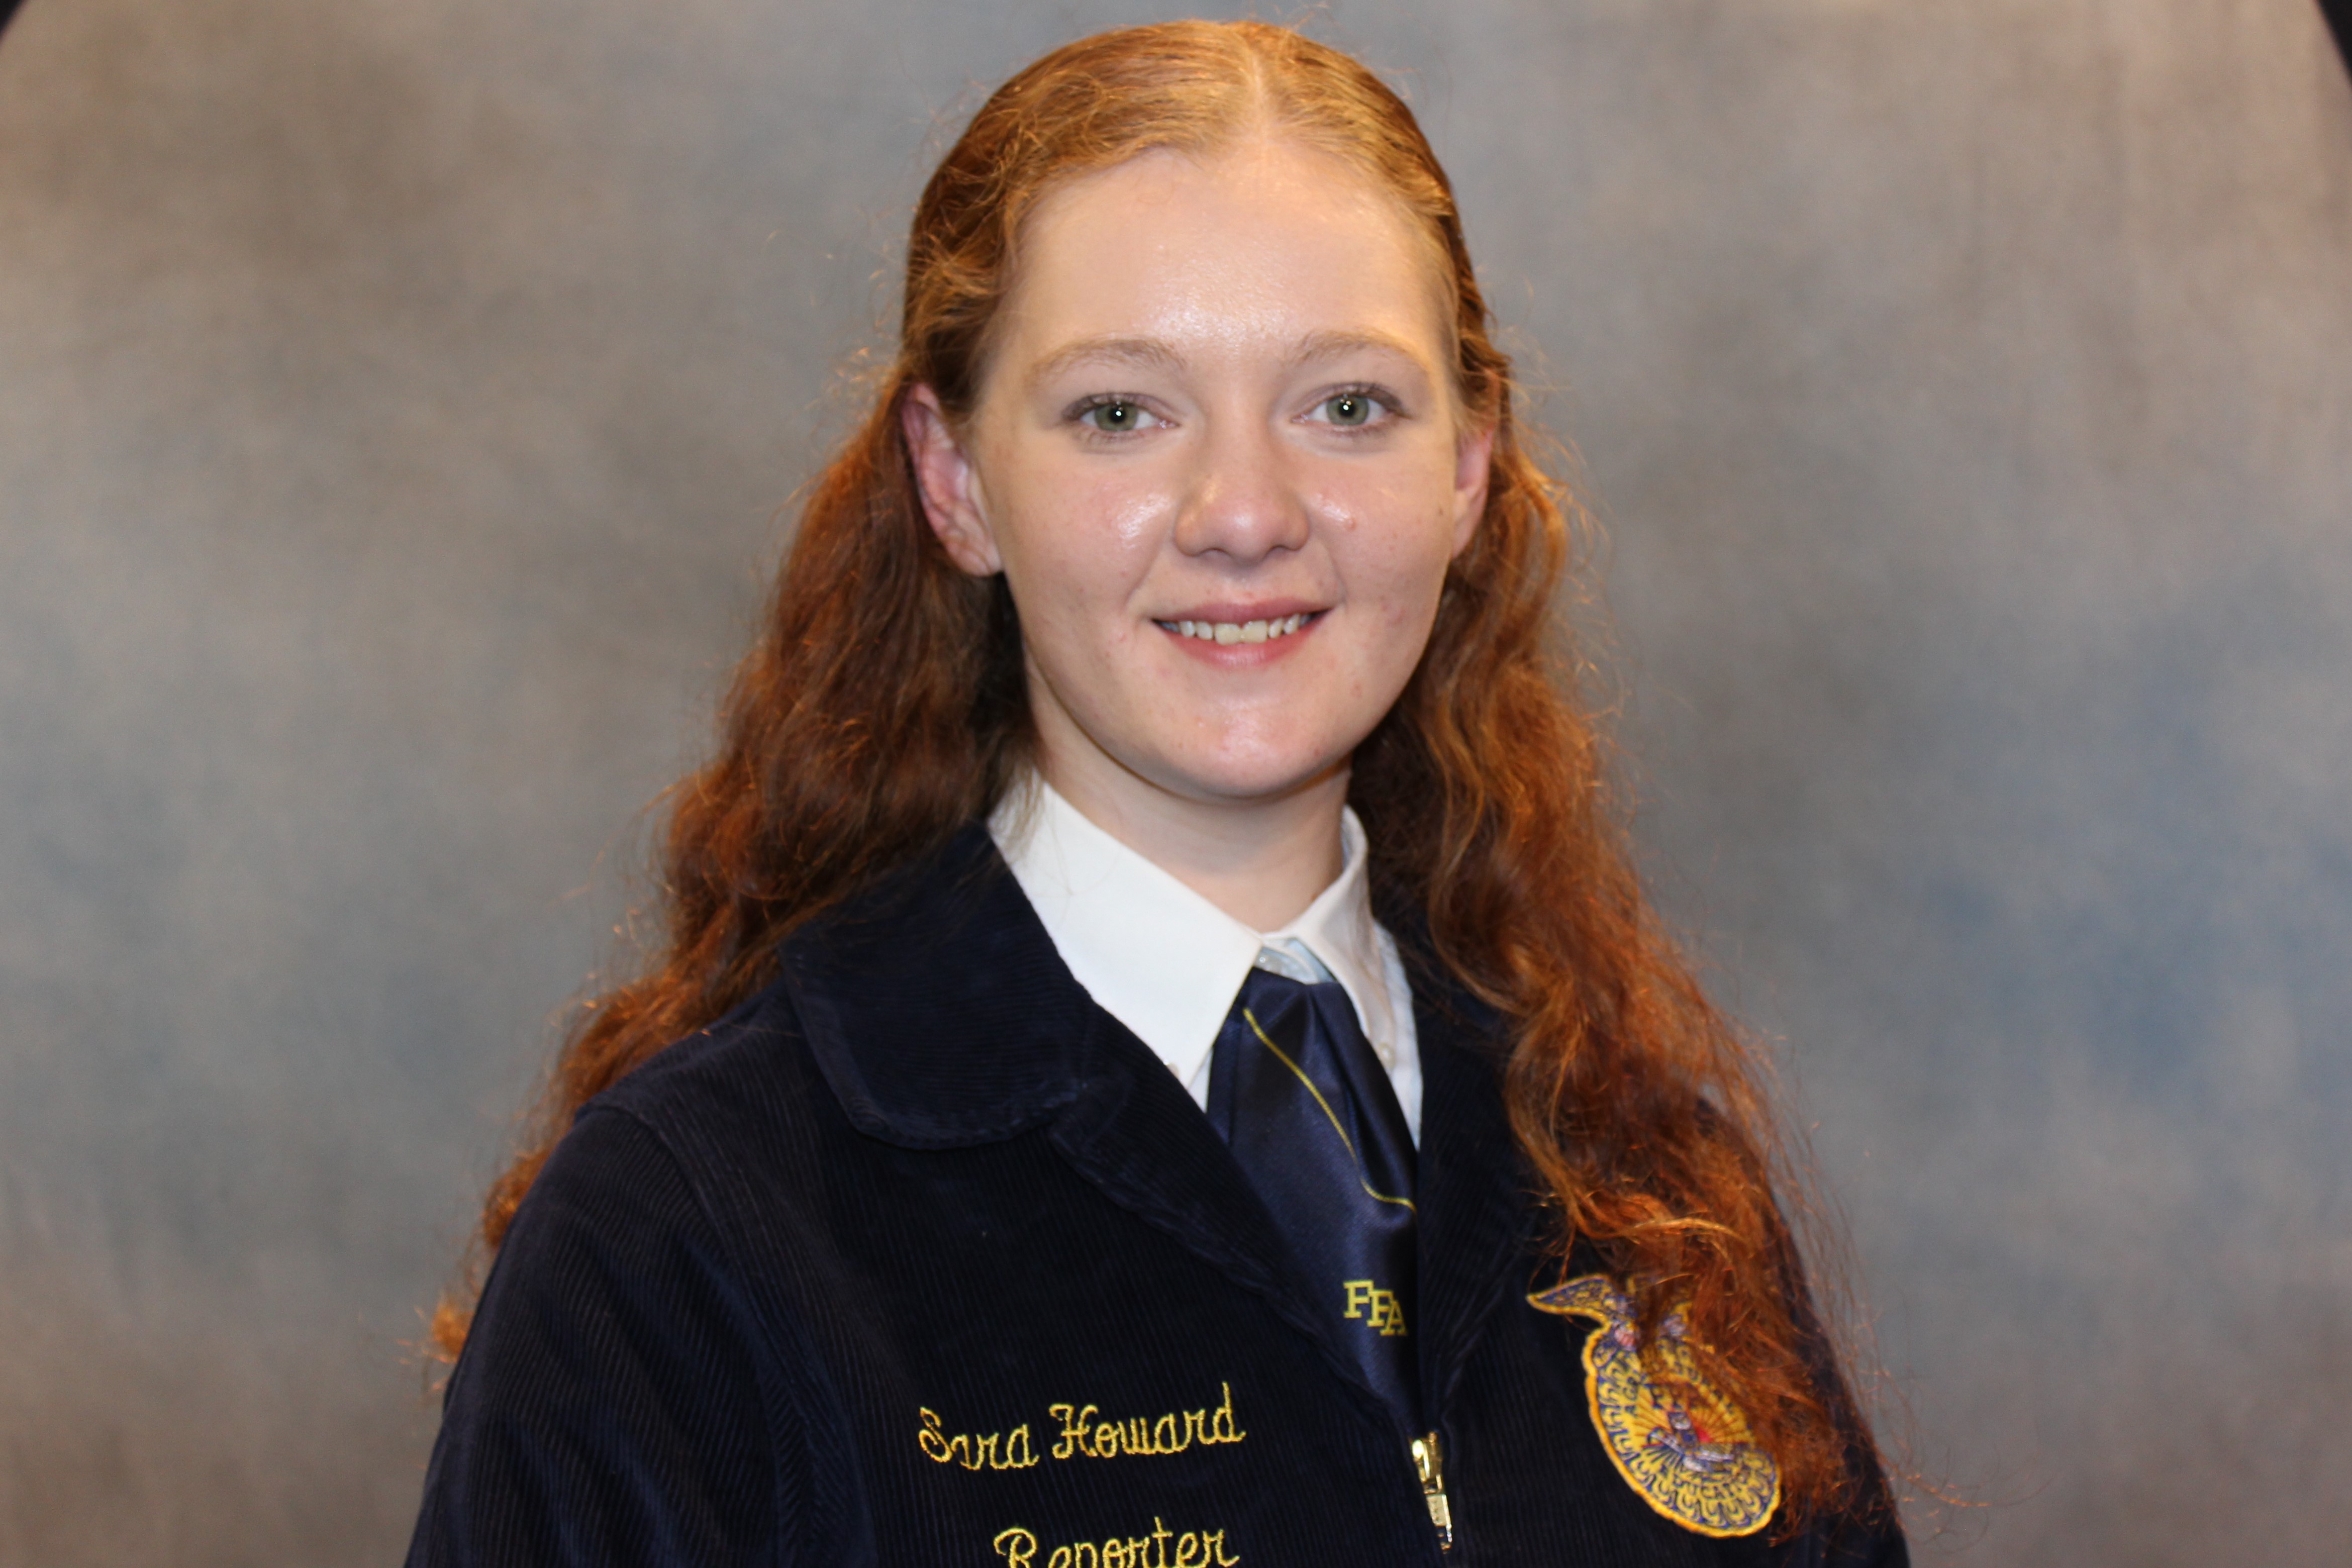 Introducing Sara Howard of the Altus FFA Chapter, Your 2021 Southwest Area Star in Agriscience 